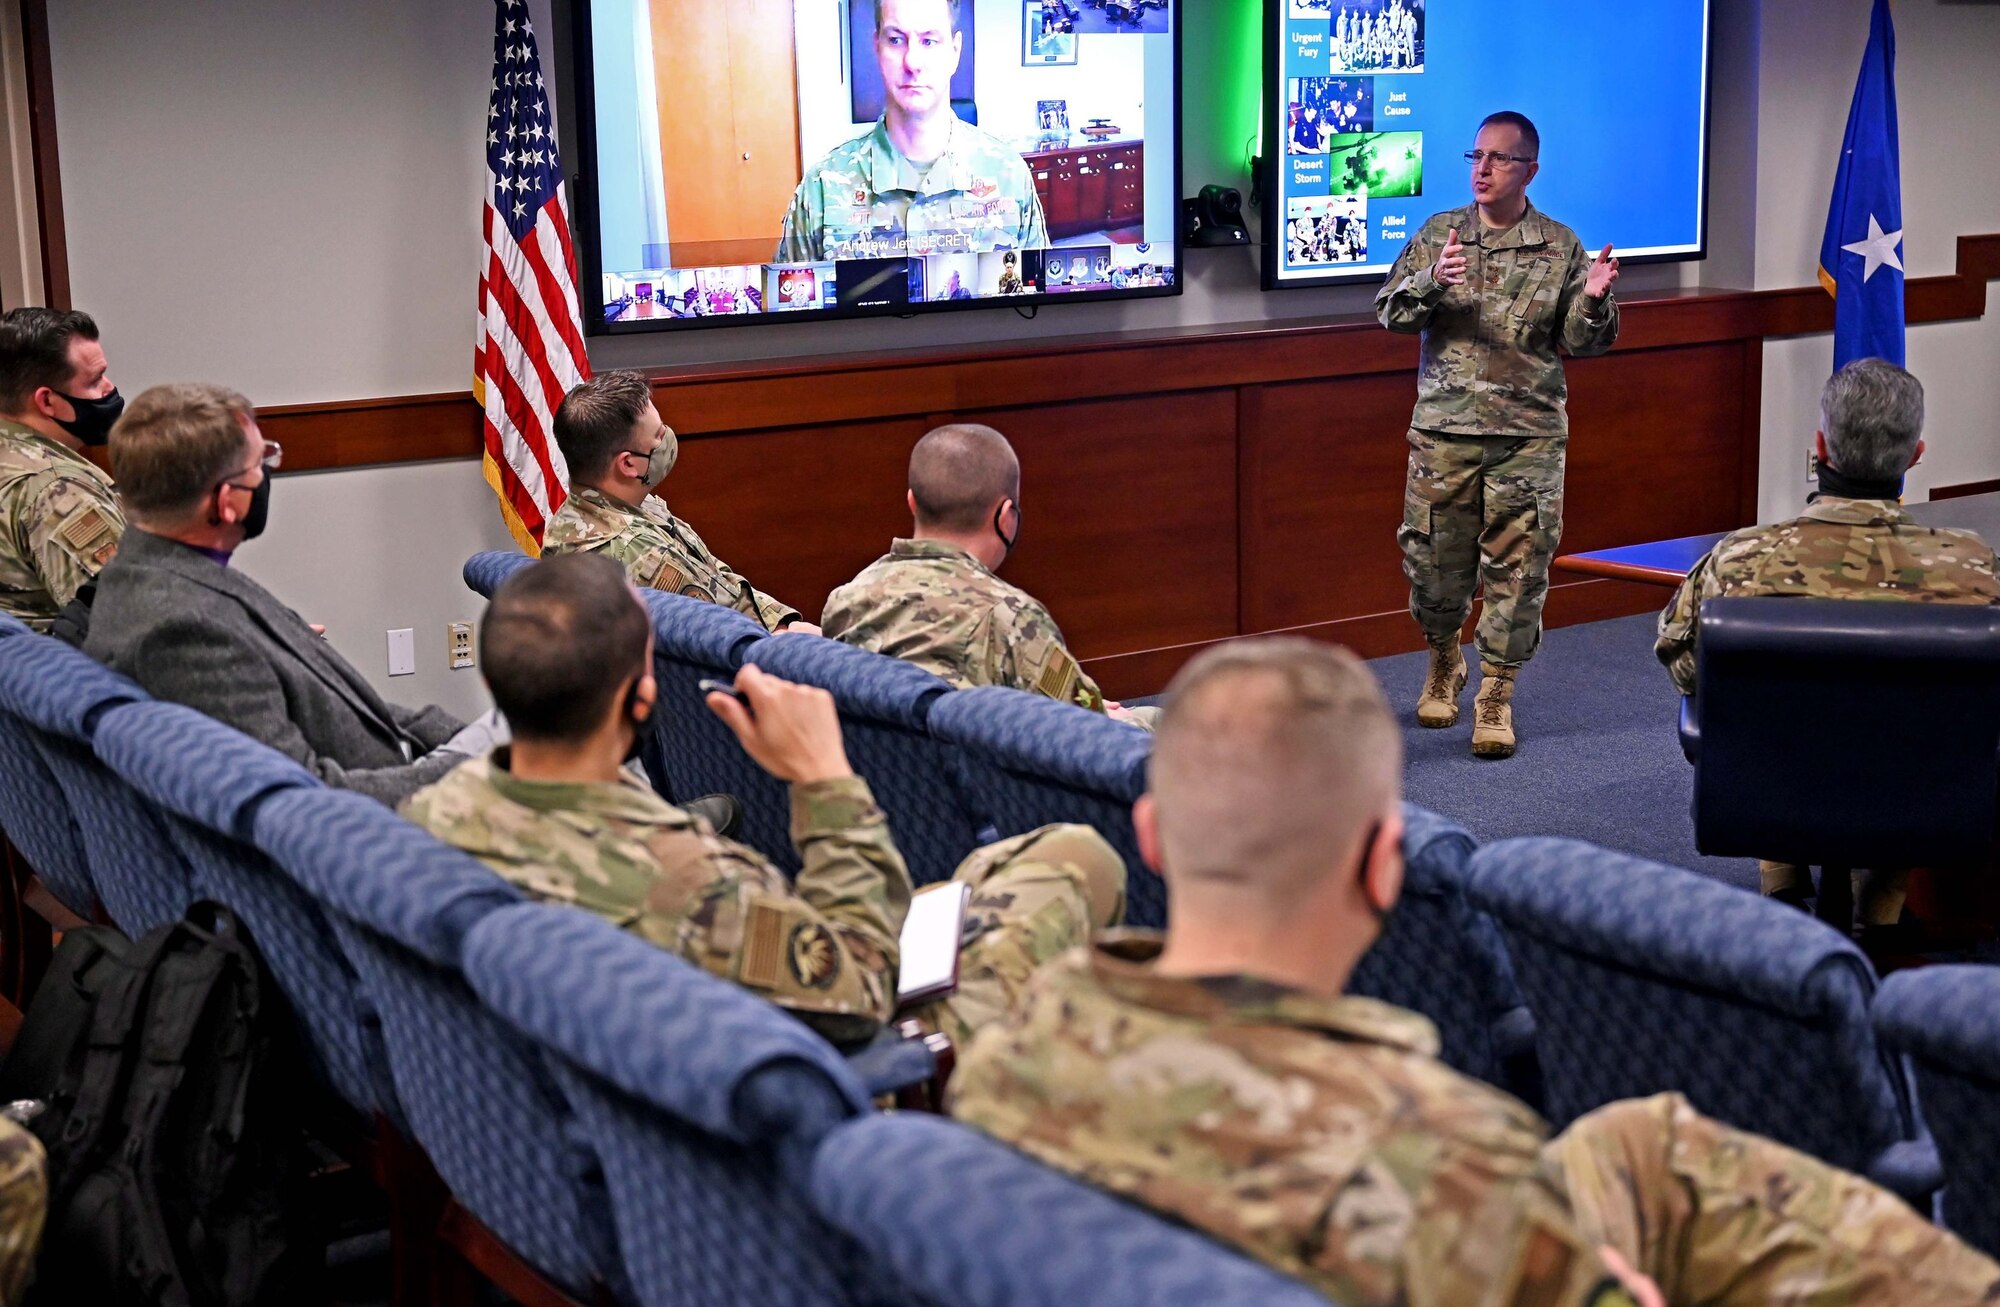 U.S. Air Force Lt. Gen. Jim Slife, commander of Air Force Special Operations command, speaks with Airmen during the command's Mission Defense Conference at Hurlburt Field, Fla., Feb. 2, 2021. The conference focused on identifying the organic cyber capabilities needed to protect missions against threats in, through, and from cyberspace. (U.S. Air Force photo by Senior Airman Brandon Esau)